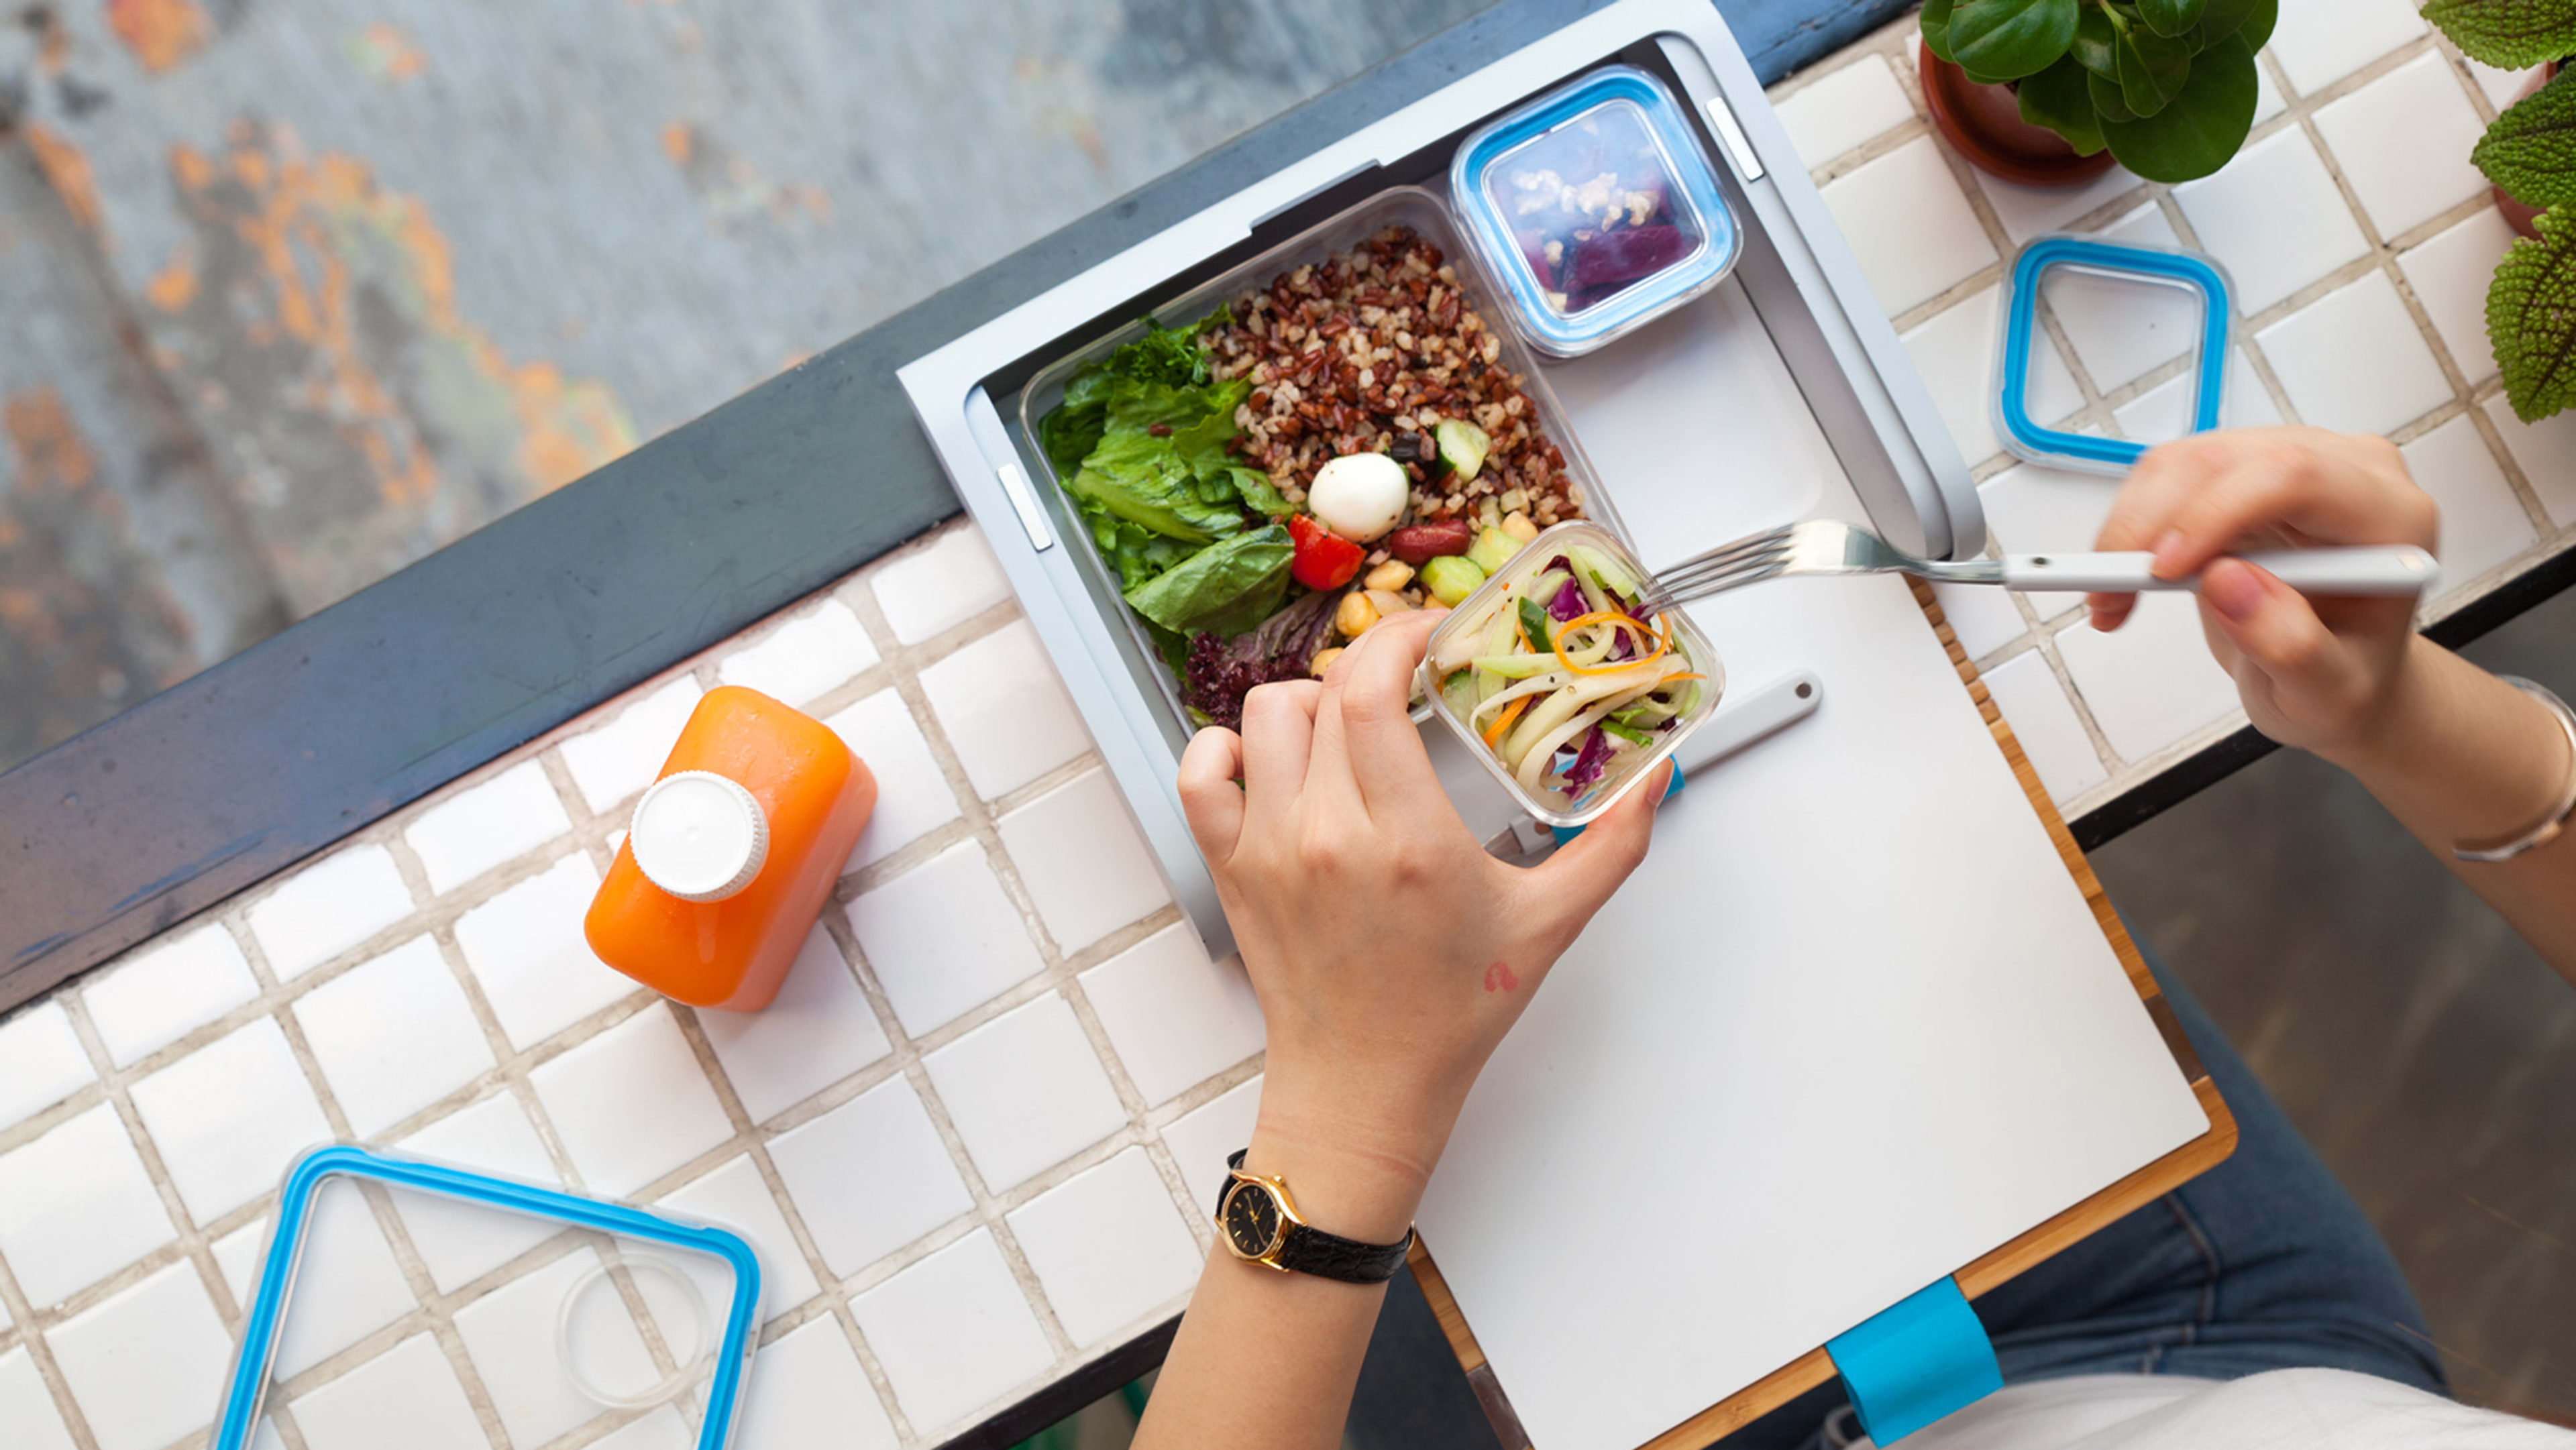 This lunch box for adults transforms sad desk eating into an Instagram event